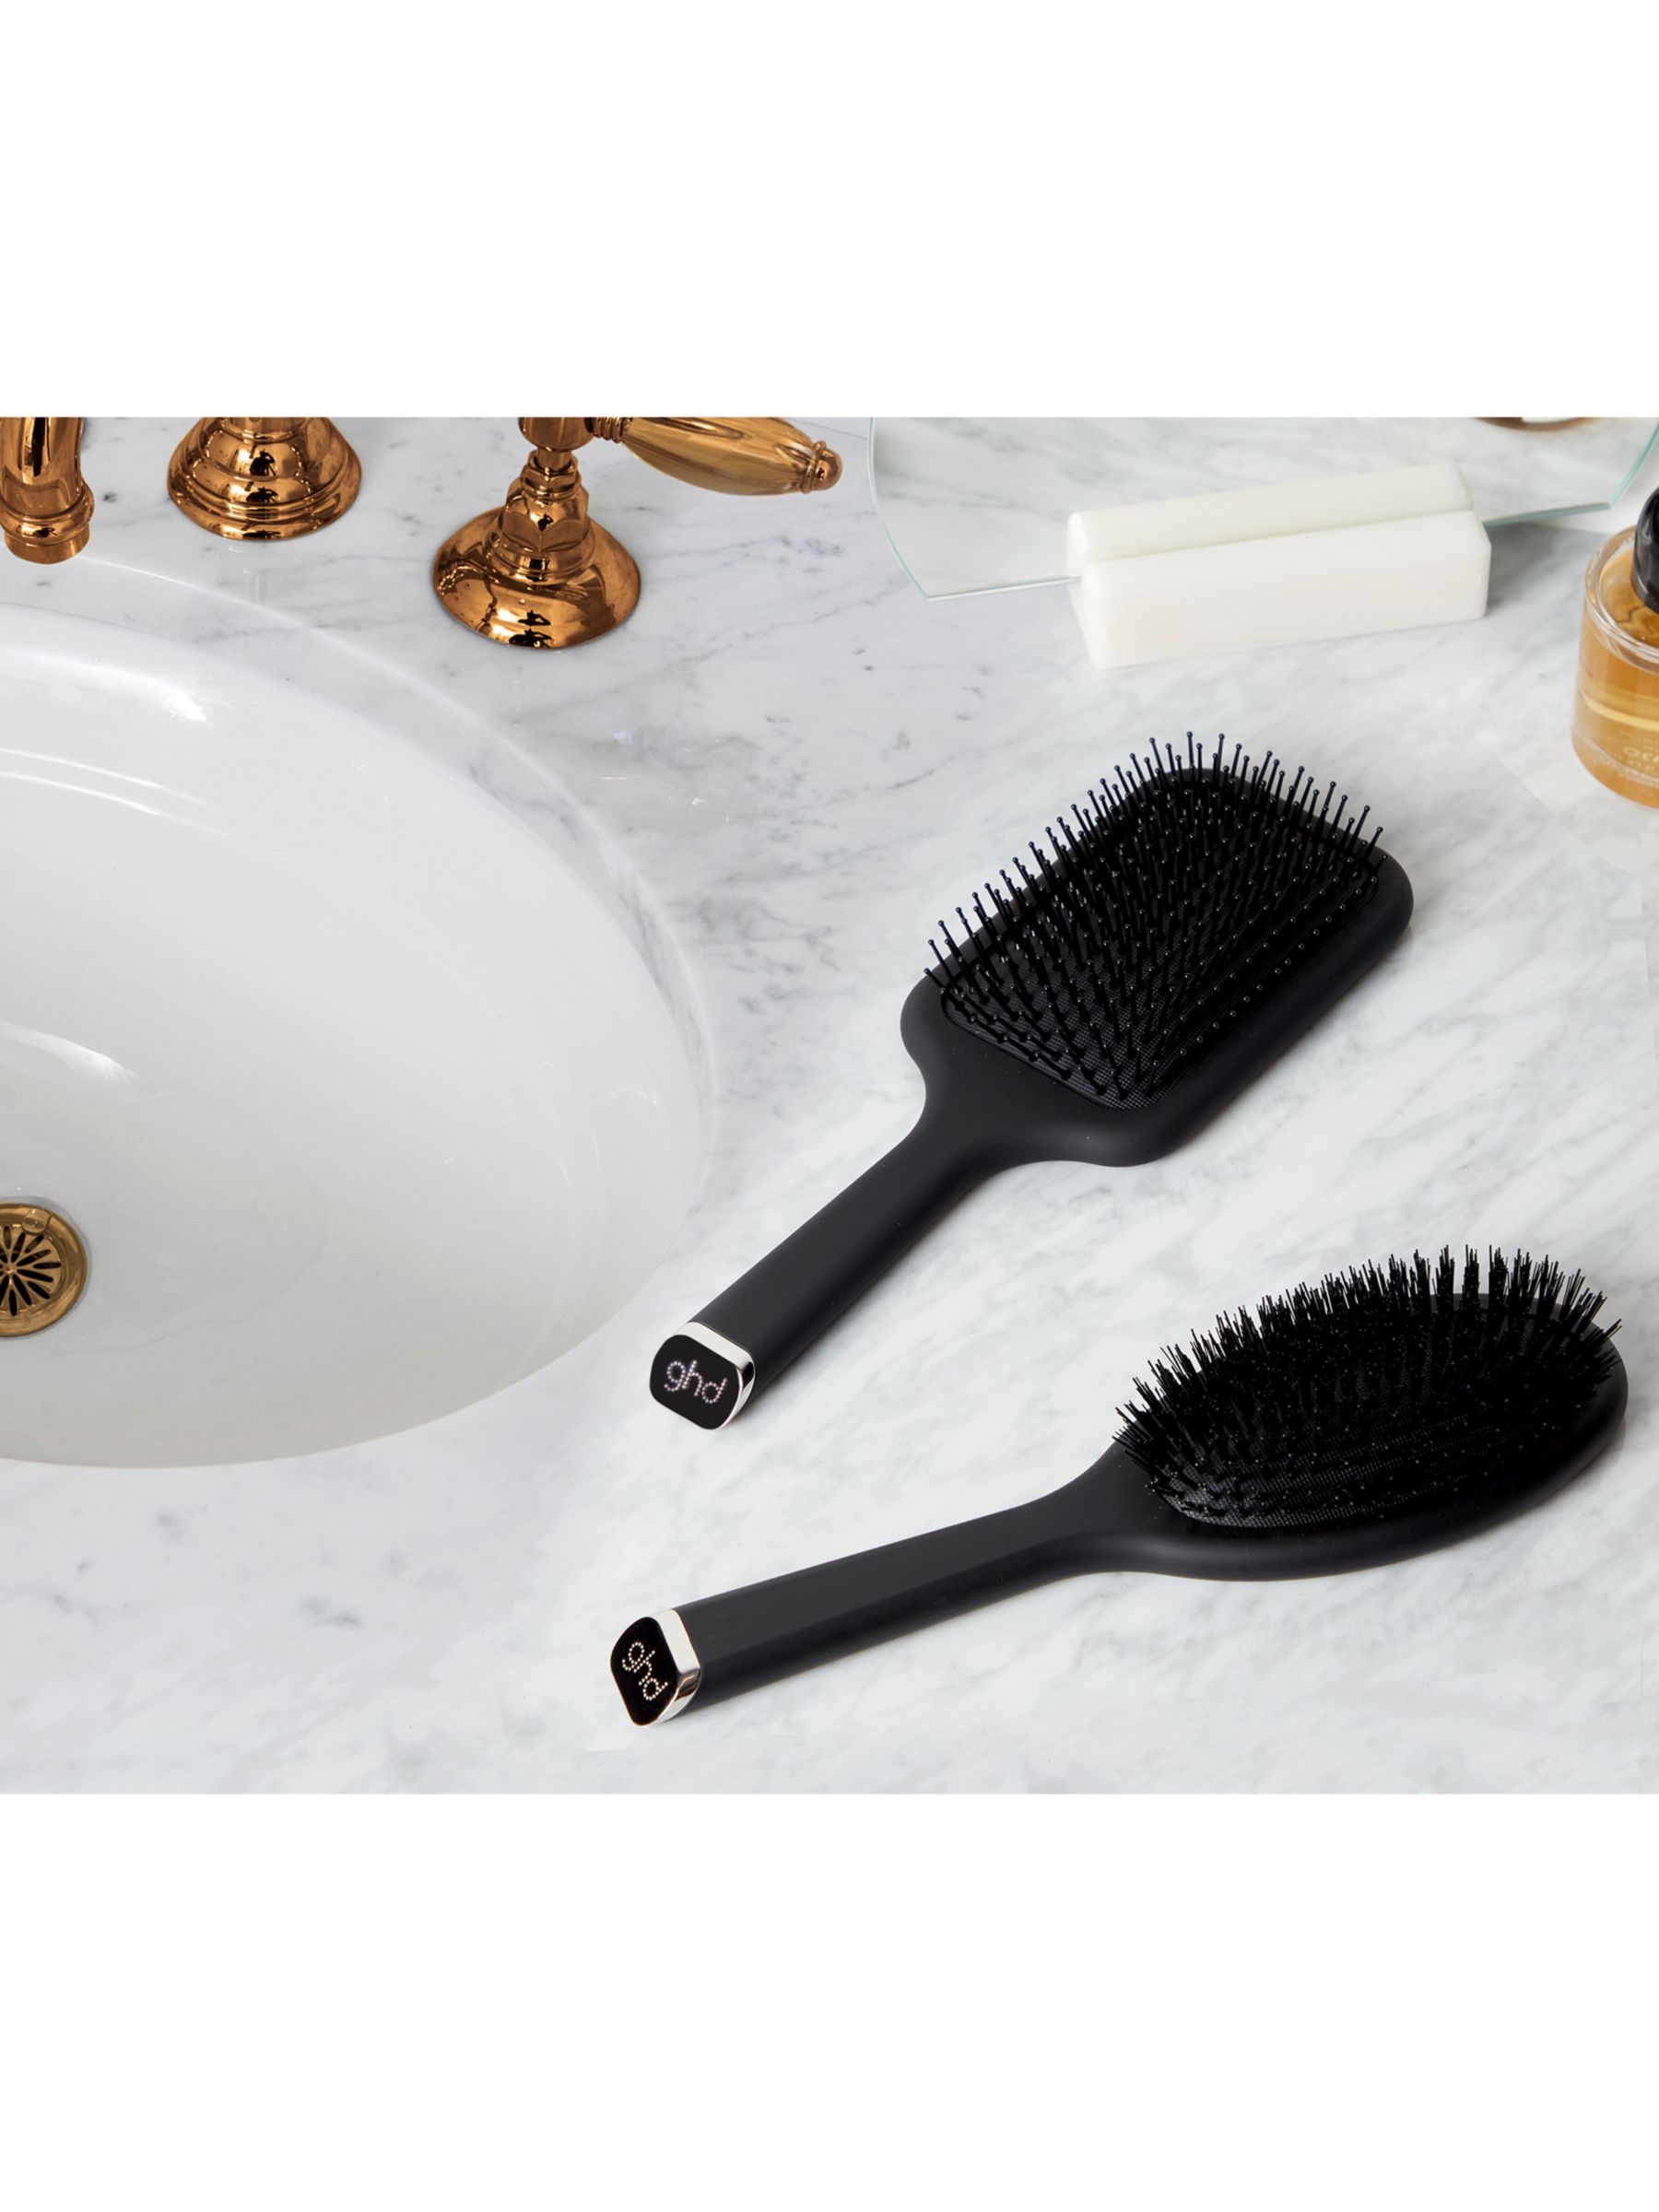 ghd All Rounder Paddle Brush 6